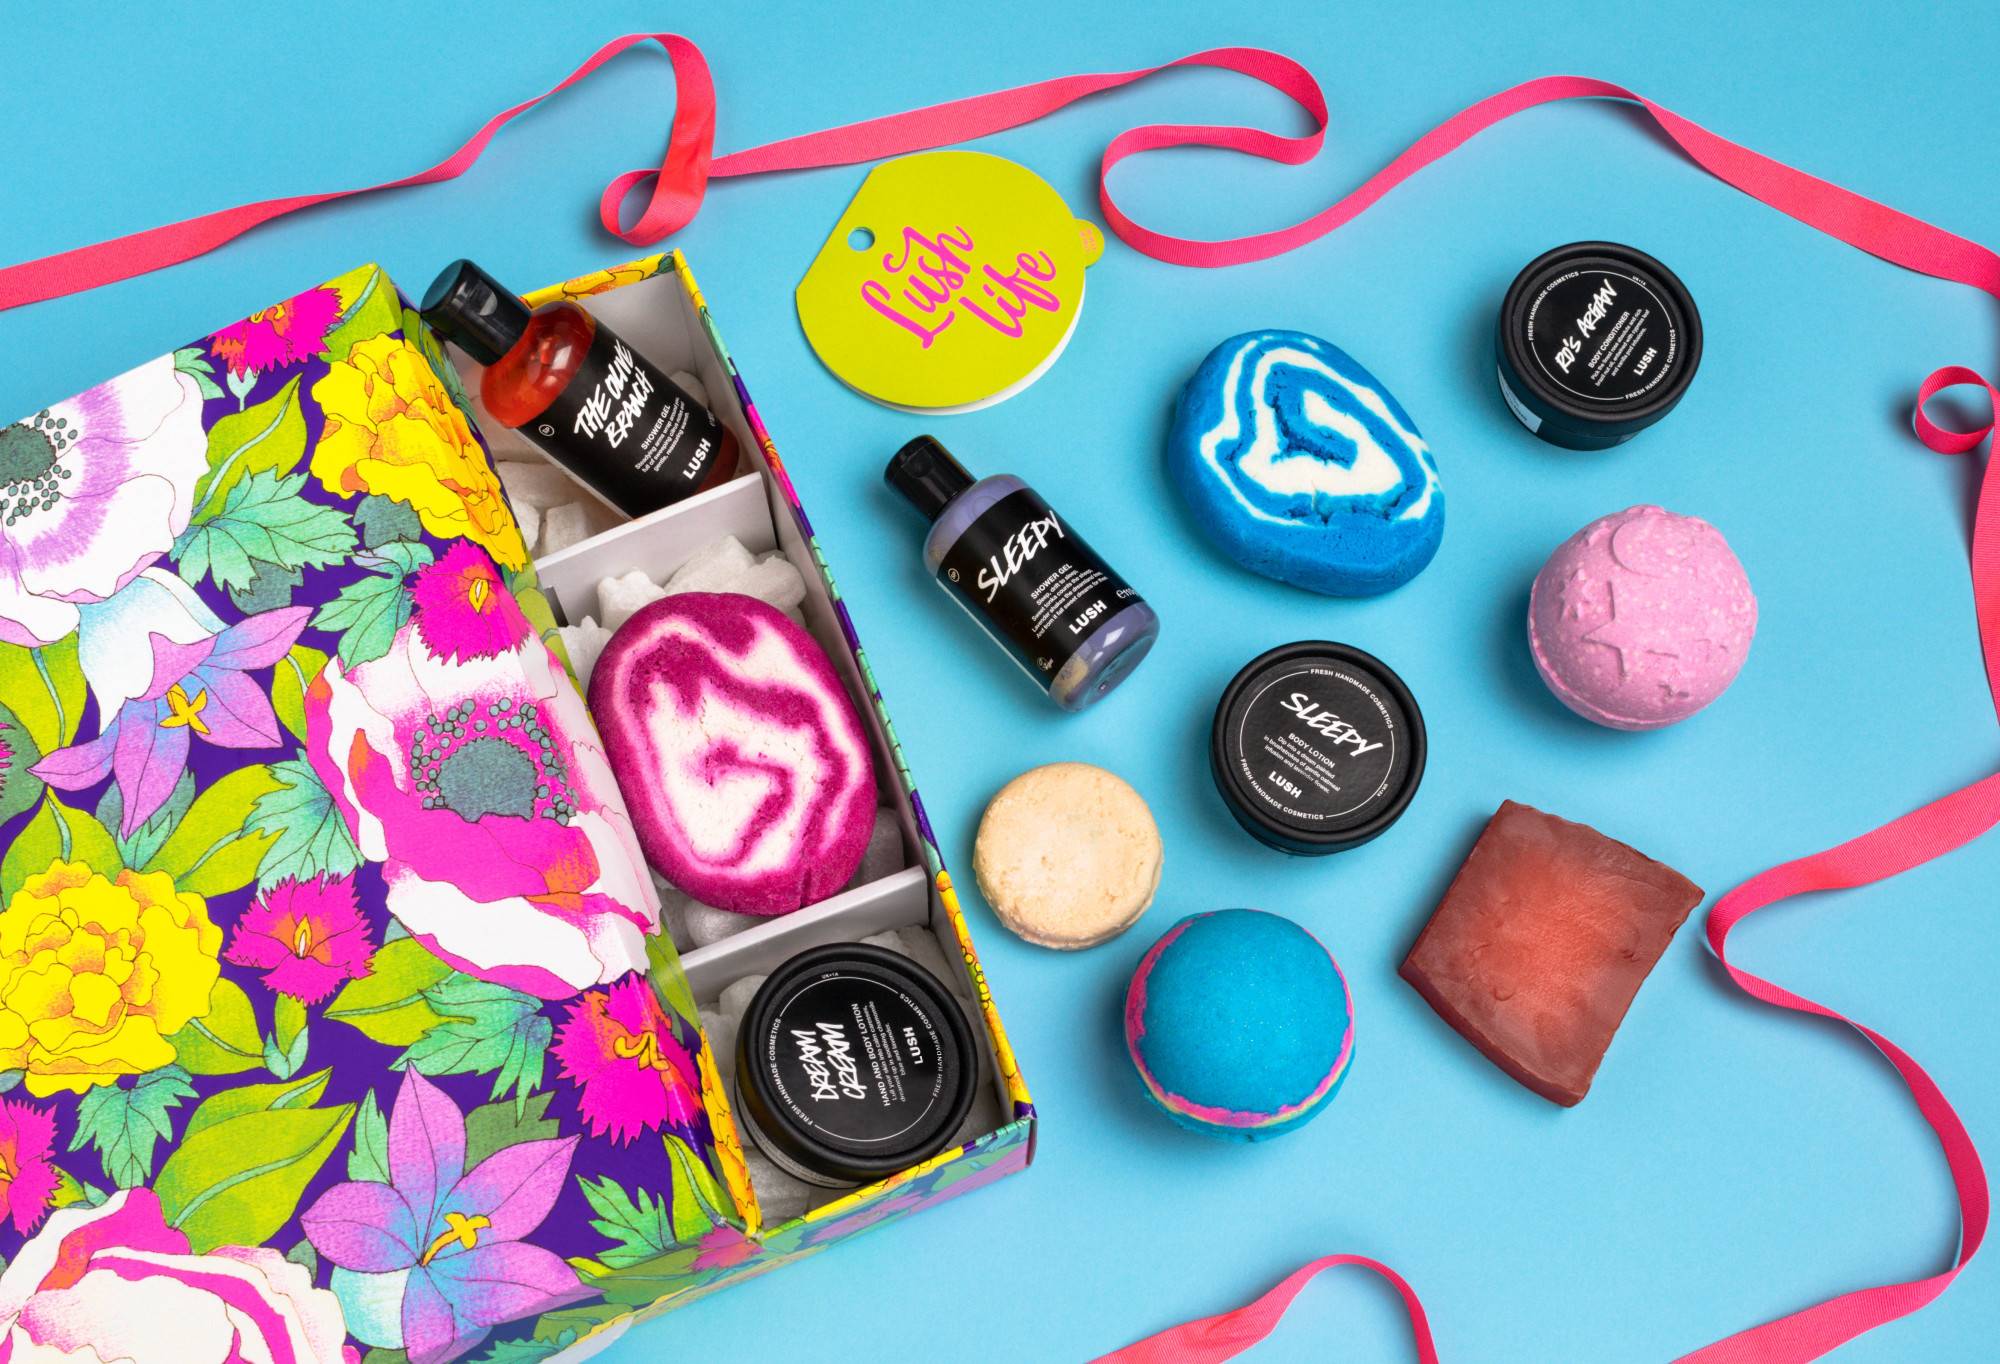 Lush Life, partly opened onto a light blue background, with its abundance of products and eco packaging pops being displayed.